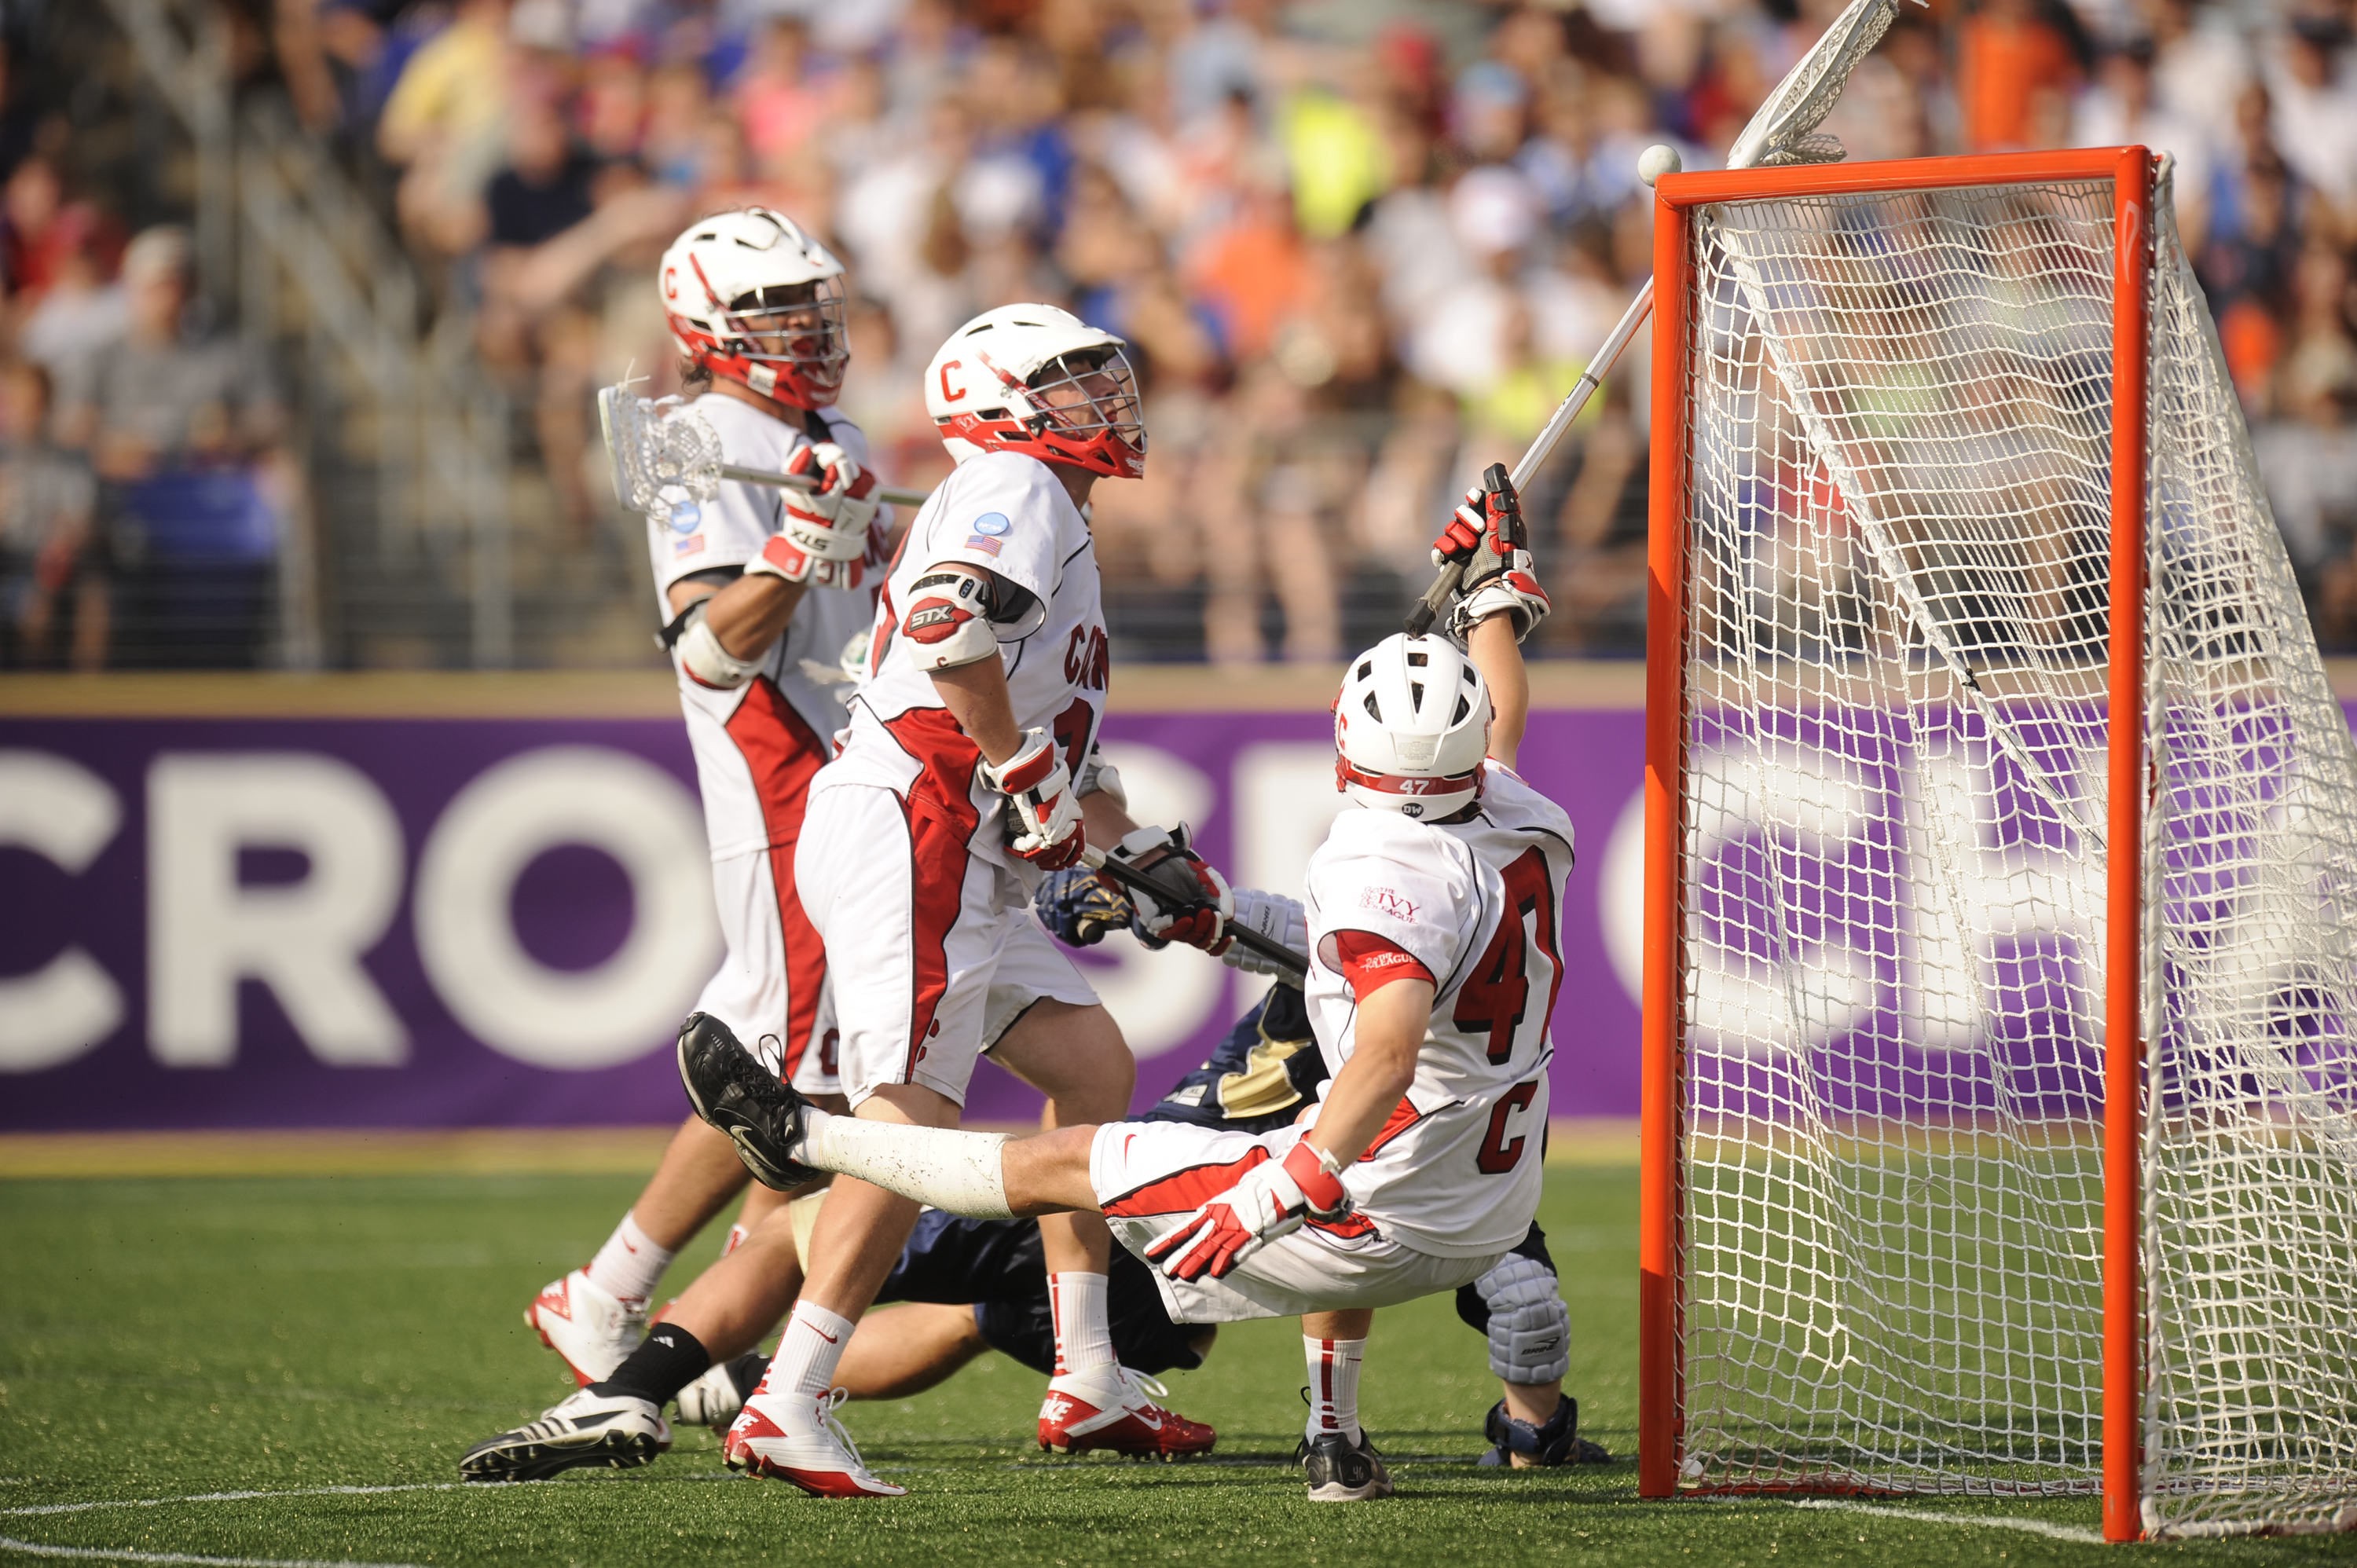 BALTIMORE, MD - MAY 29:  AJ Fiore #47 of the Cornell Big Red makes a save against the Notre Dame Fighting Irish during the 2010 NCAA Division 1 Lacrosse Semifinal Championship game on May 29, 2010 at M & T Bank Stadium in Baltimore, Maryland.  (Photo by M